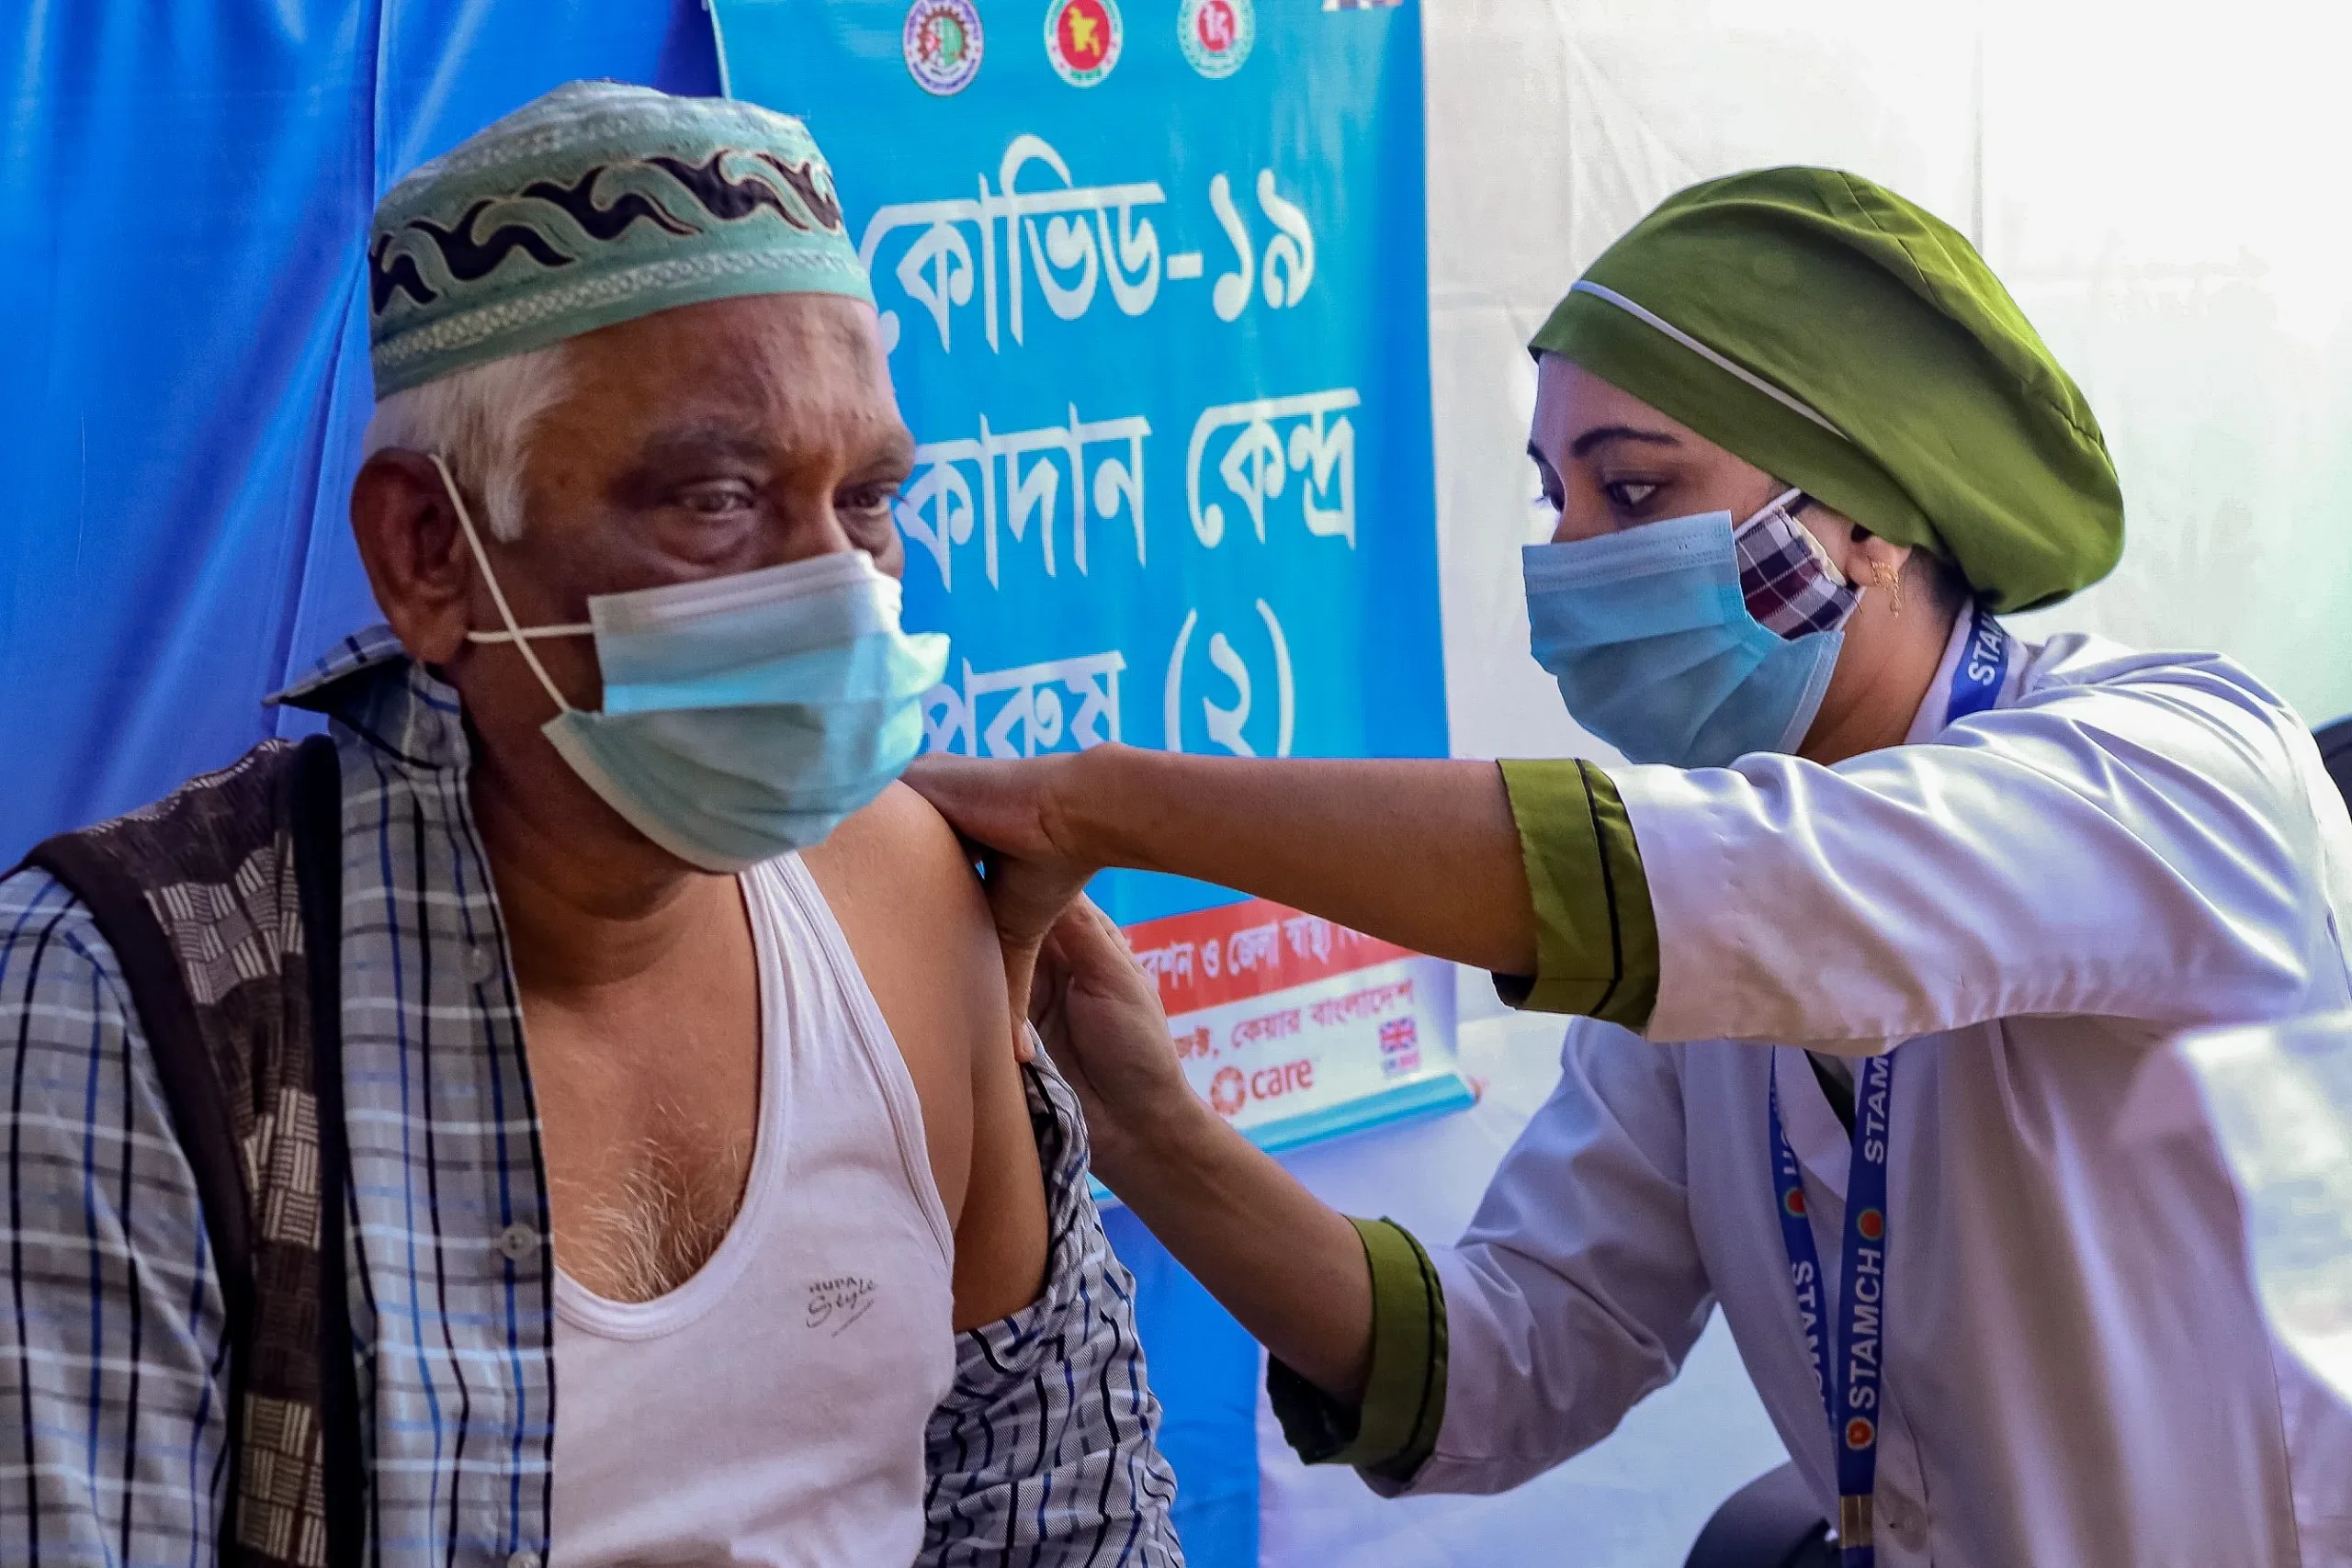 Both wearing masks, a woman health care worker gives a vaccine to a man.